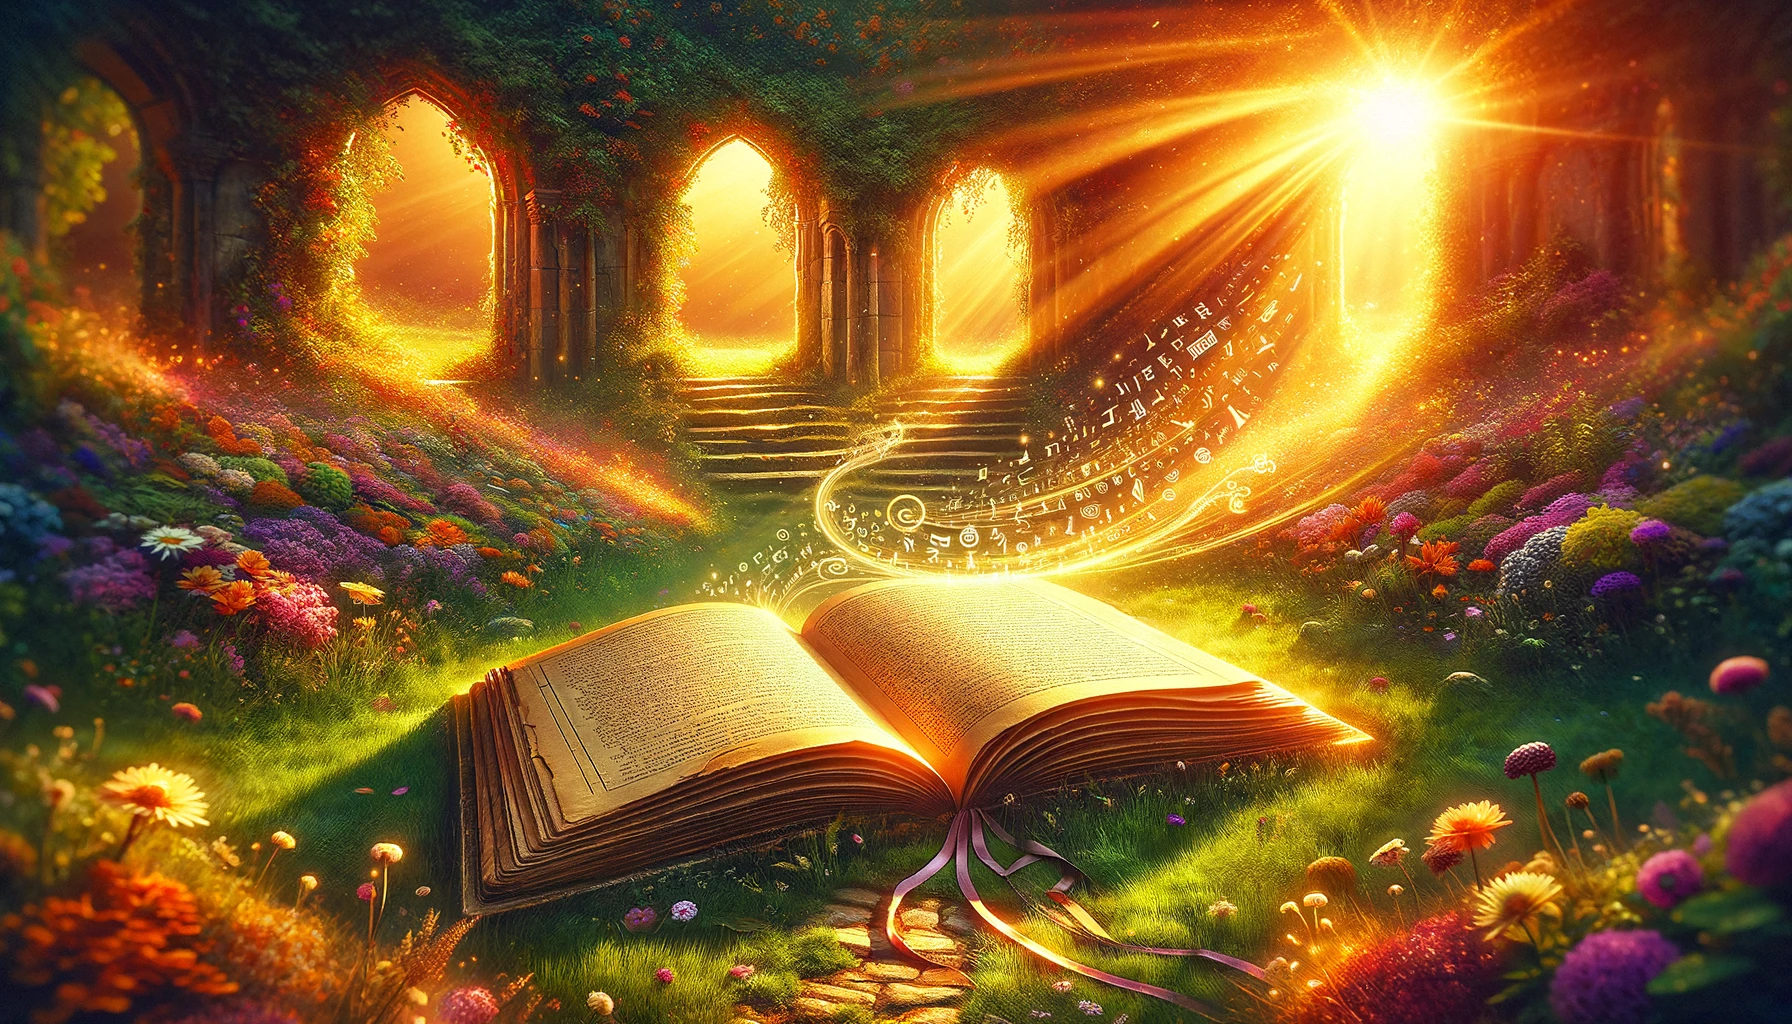 Lush meadow with glowing book and stone archways